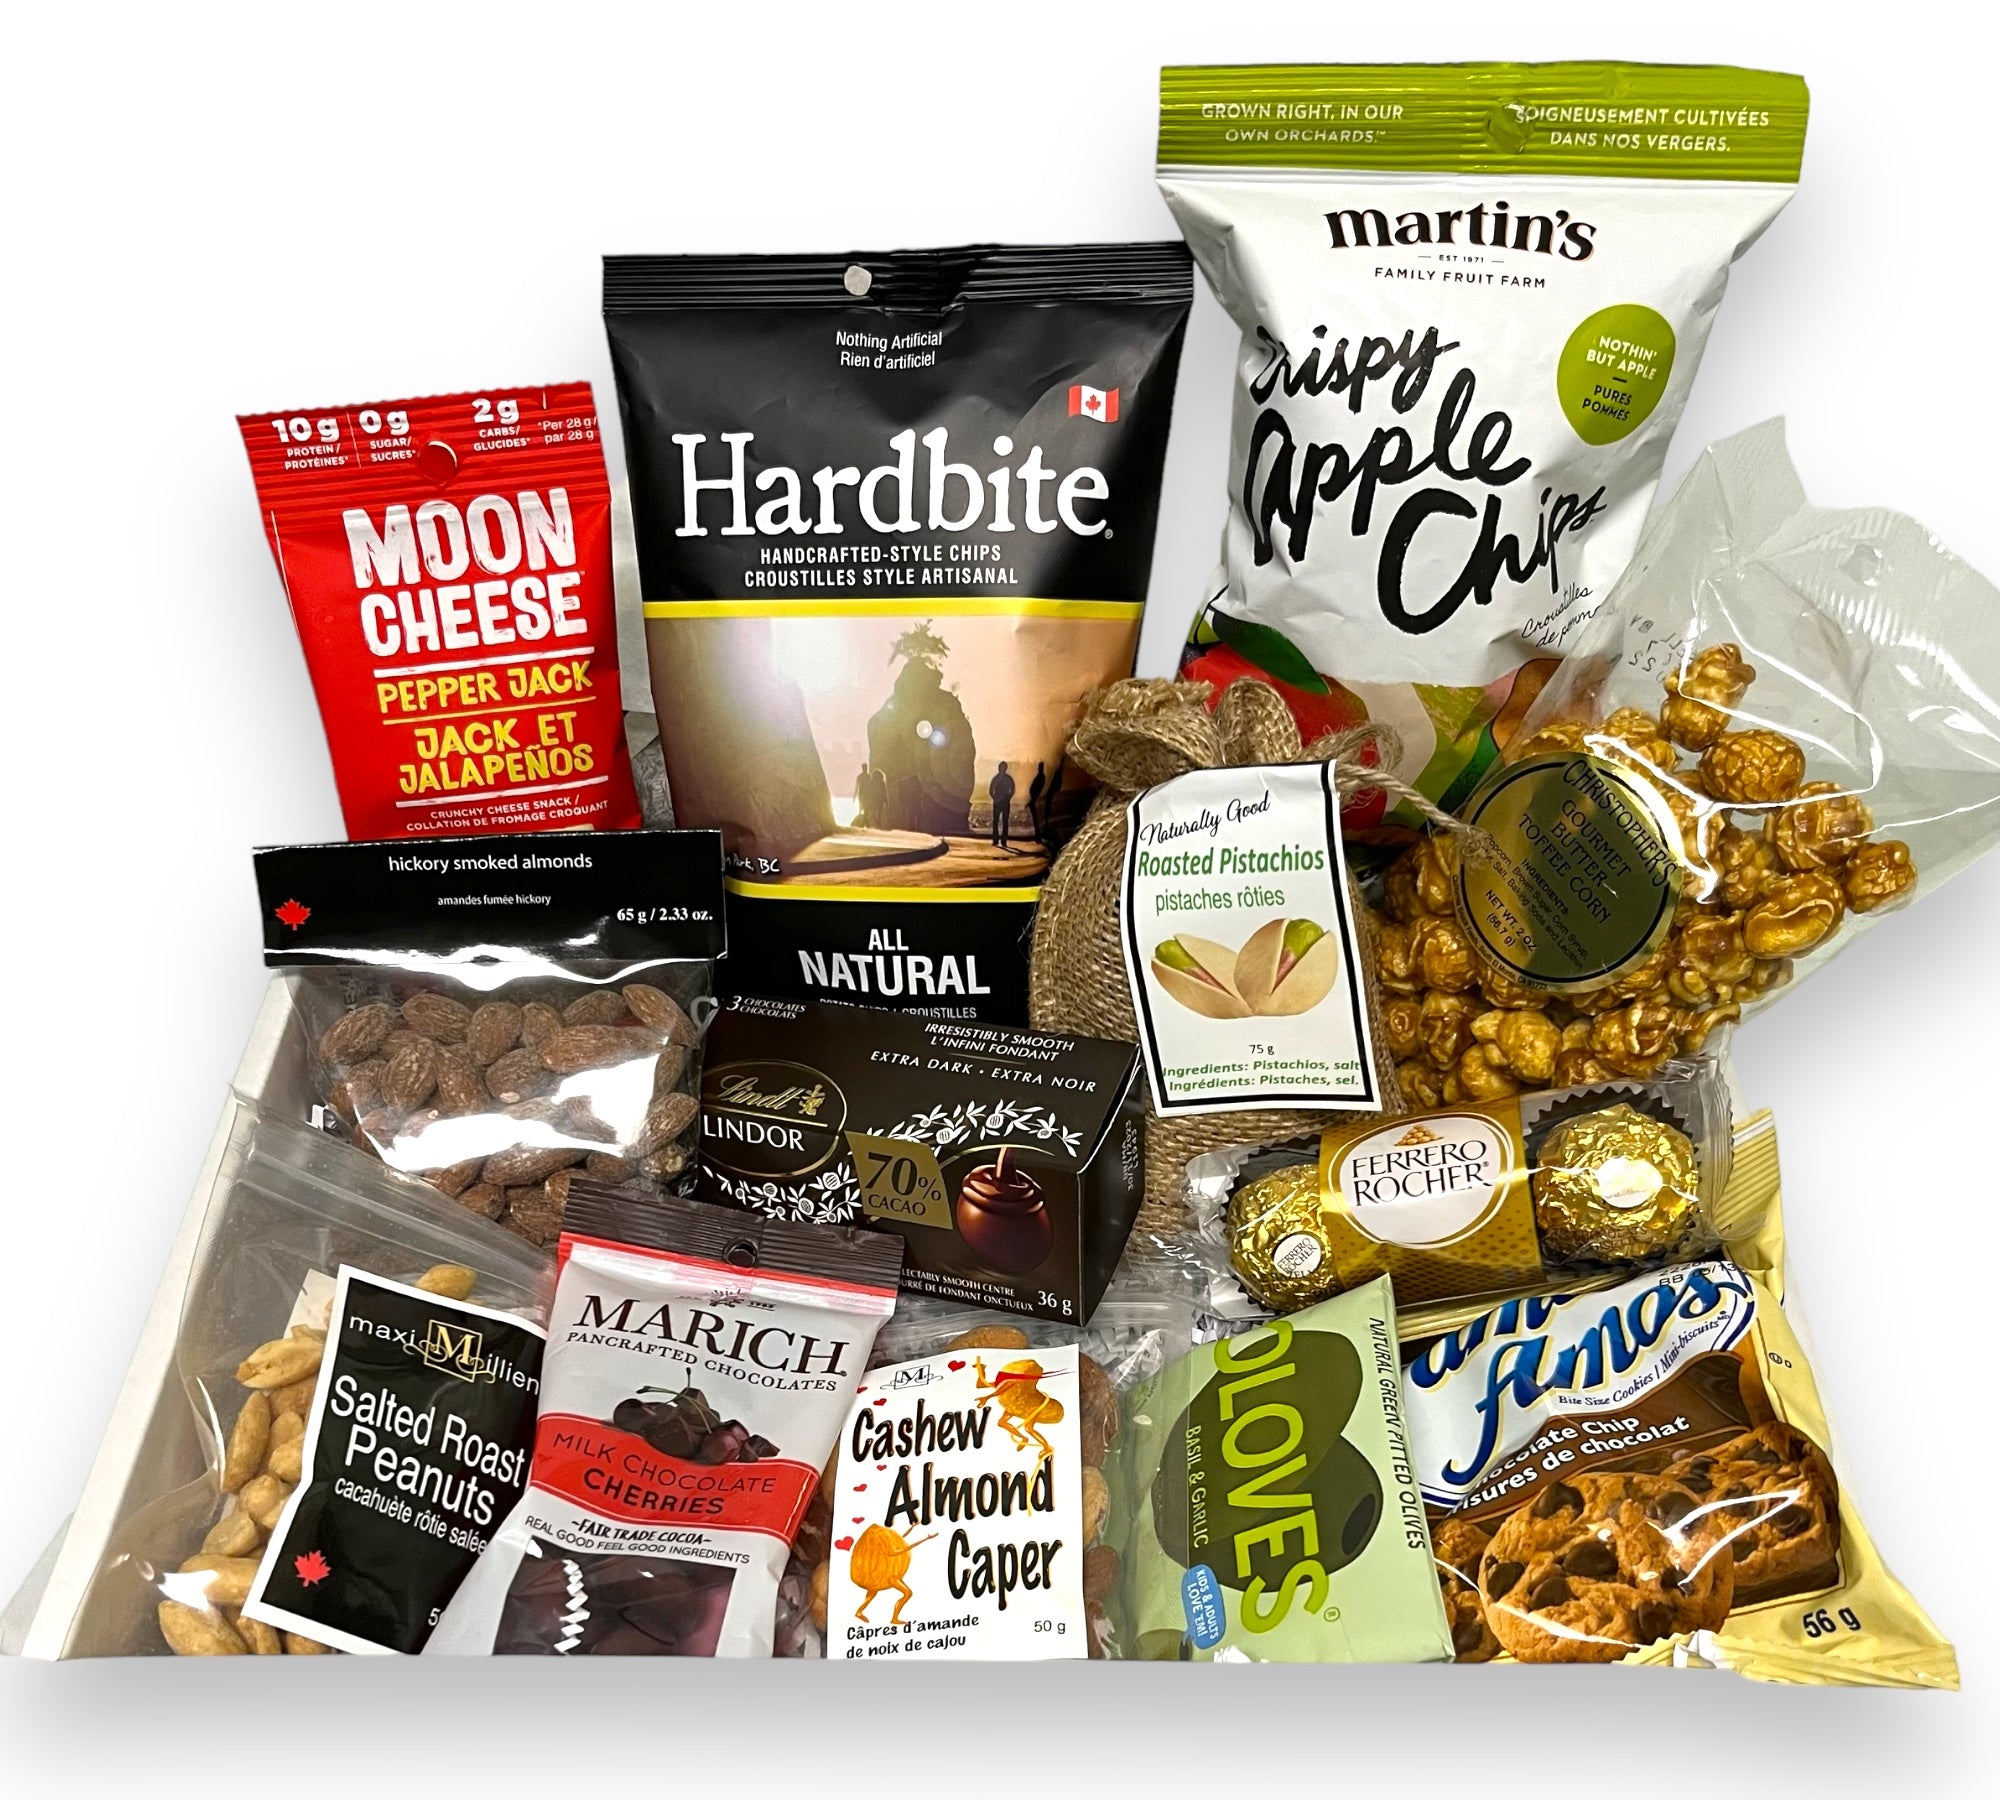 Say 'I'm Nuts About You' with Our Delicious Mix of Nuts - The Perfect Gift for Your Loved Ones